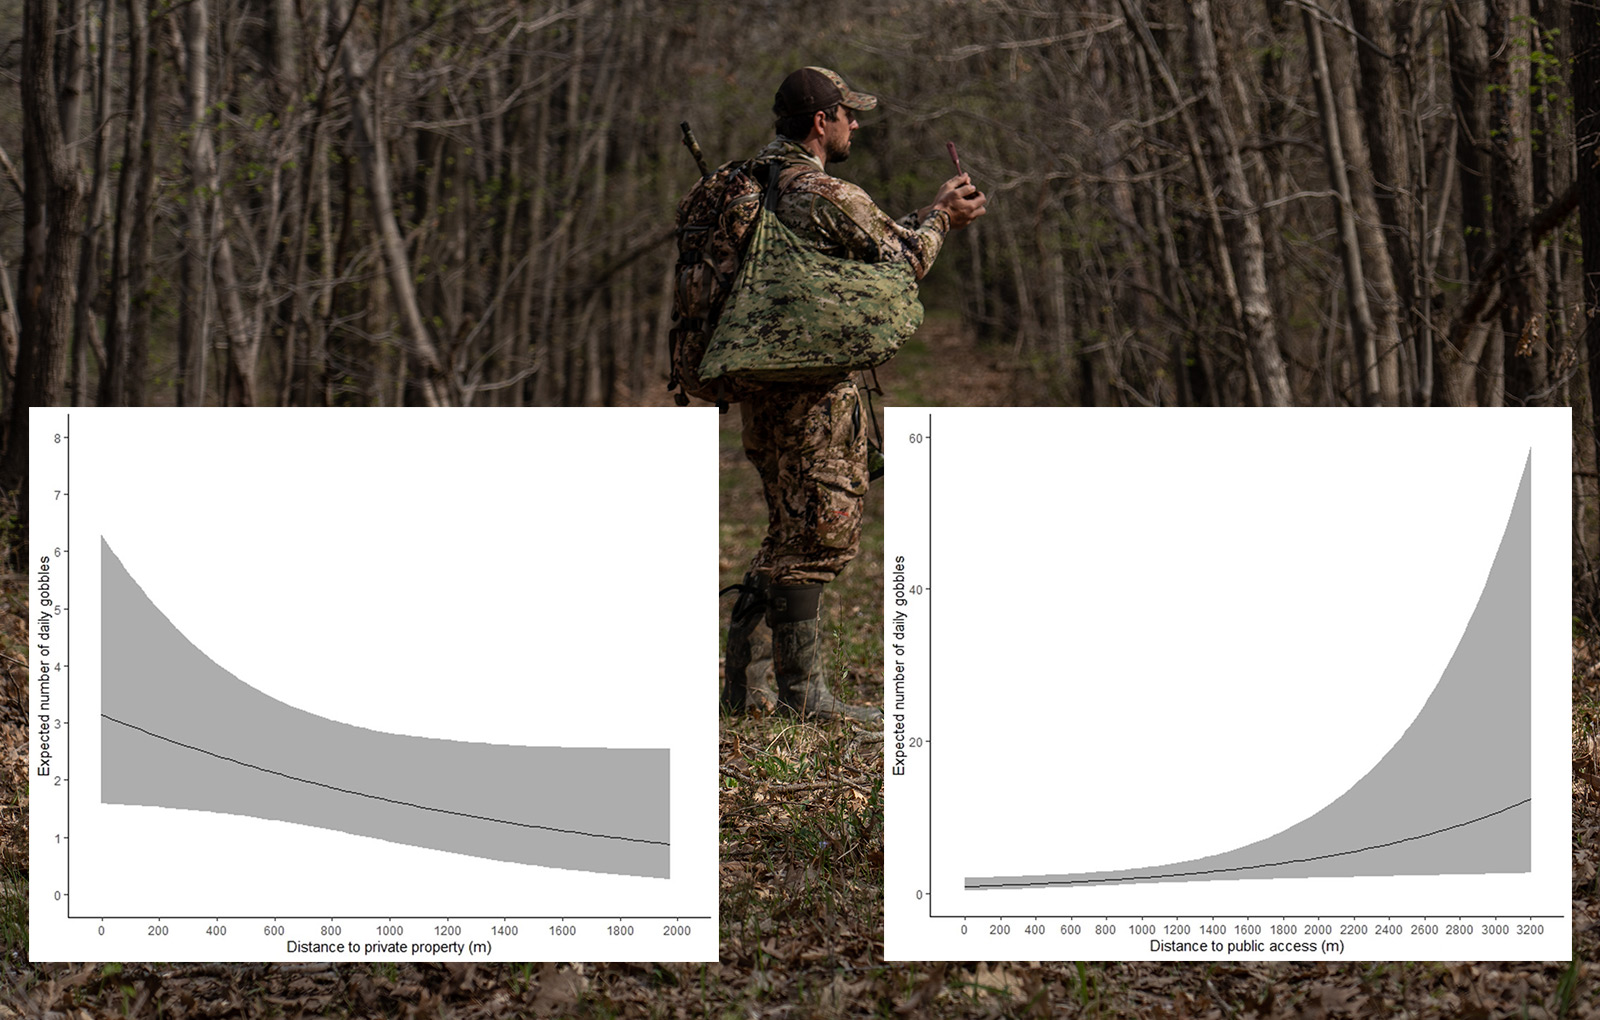 A hunter in a forest with 2 graphs on the image about expected number of daily gobbles, the first data set is distance to private property and the second is distance to public access. The public access graph shows a steep upward trajectory of daily gobbles the further you go from public access.  